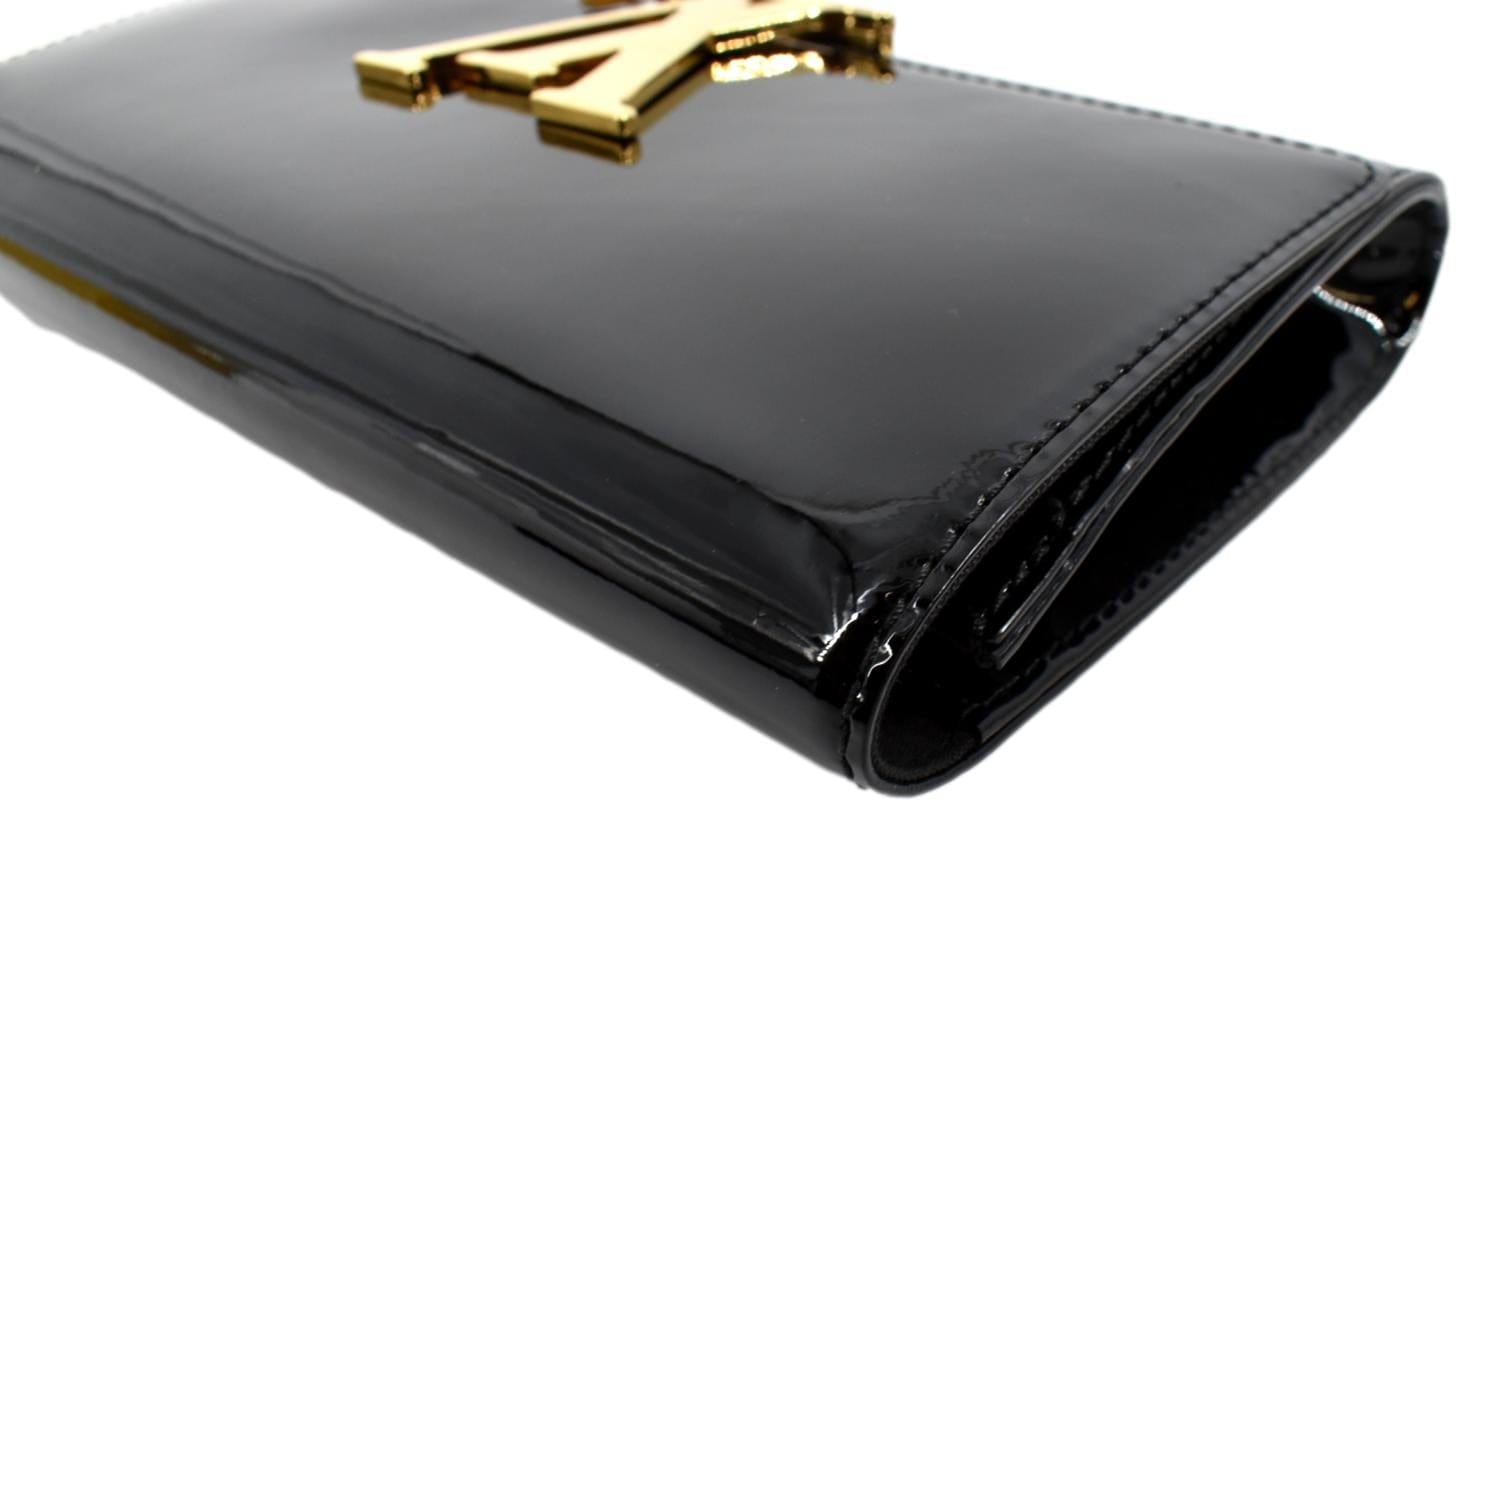 Normandy leather wallet Louis Vuitton Black in Leather - 31921622